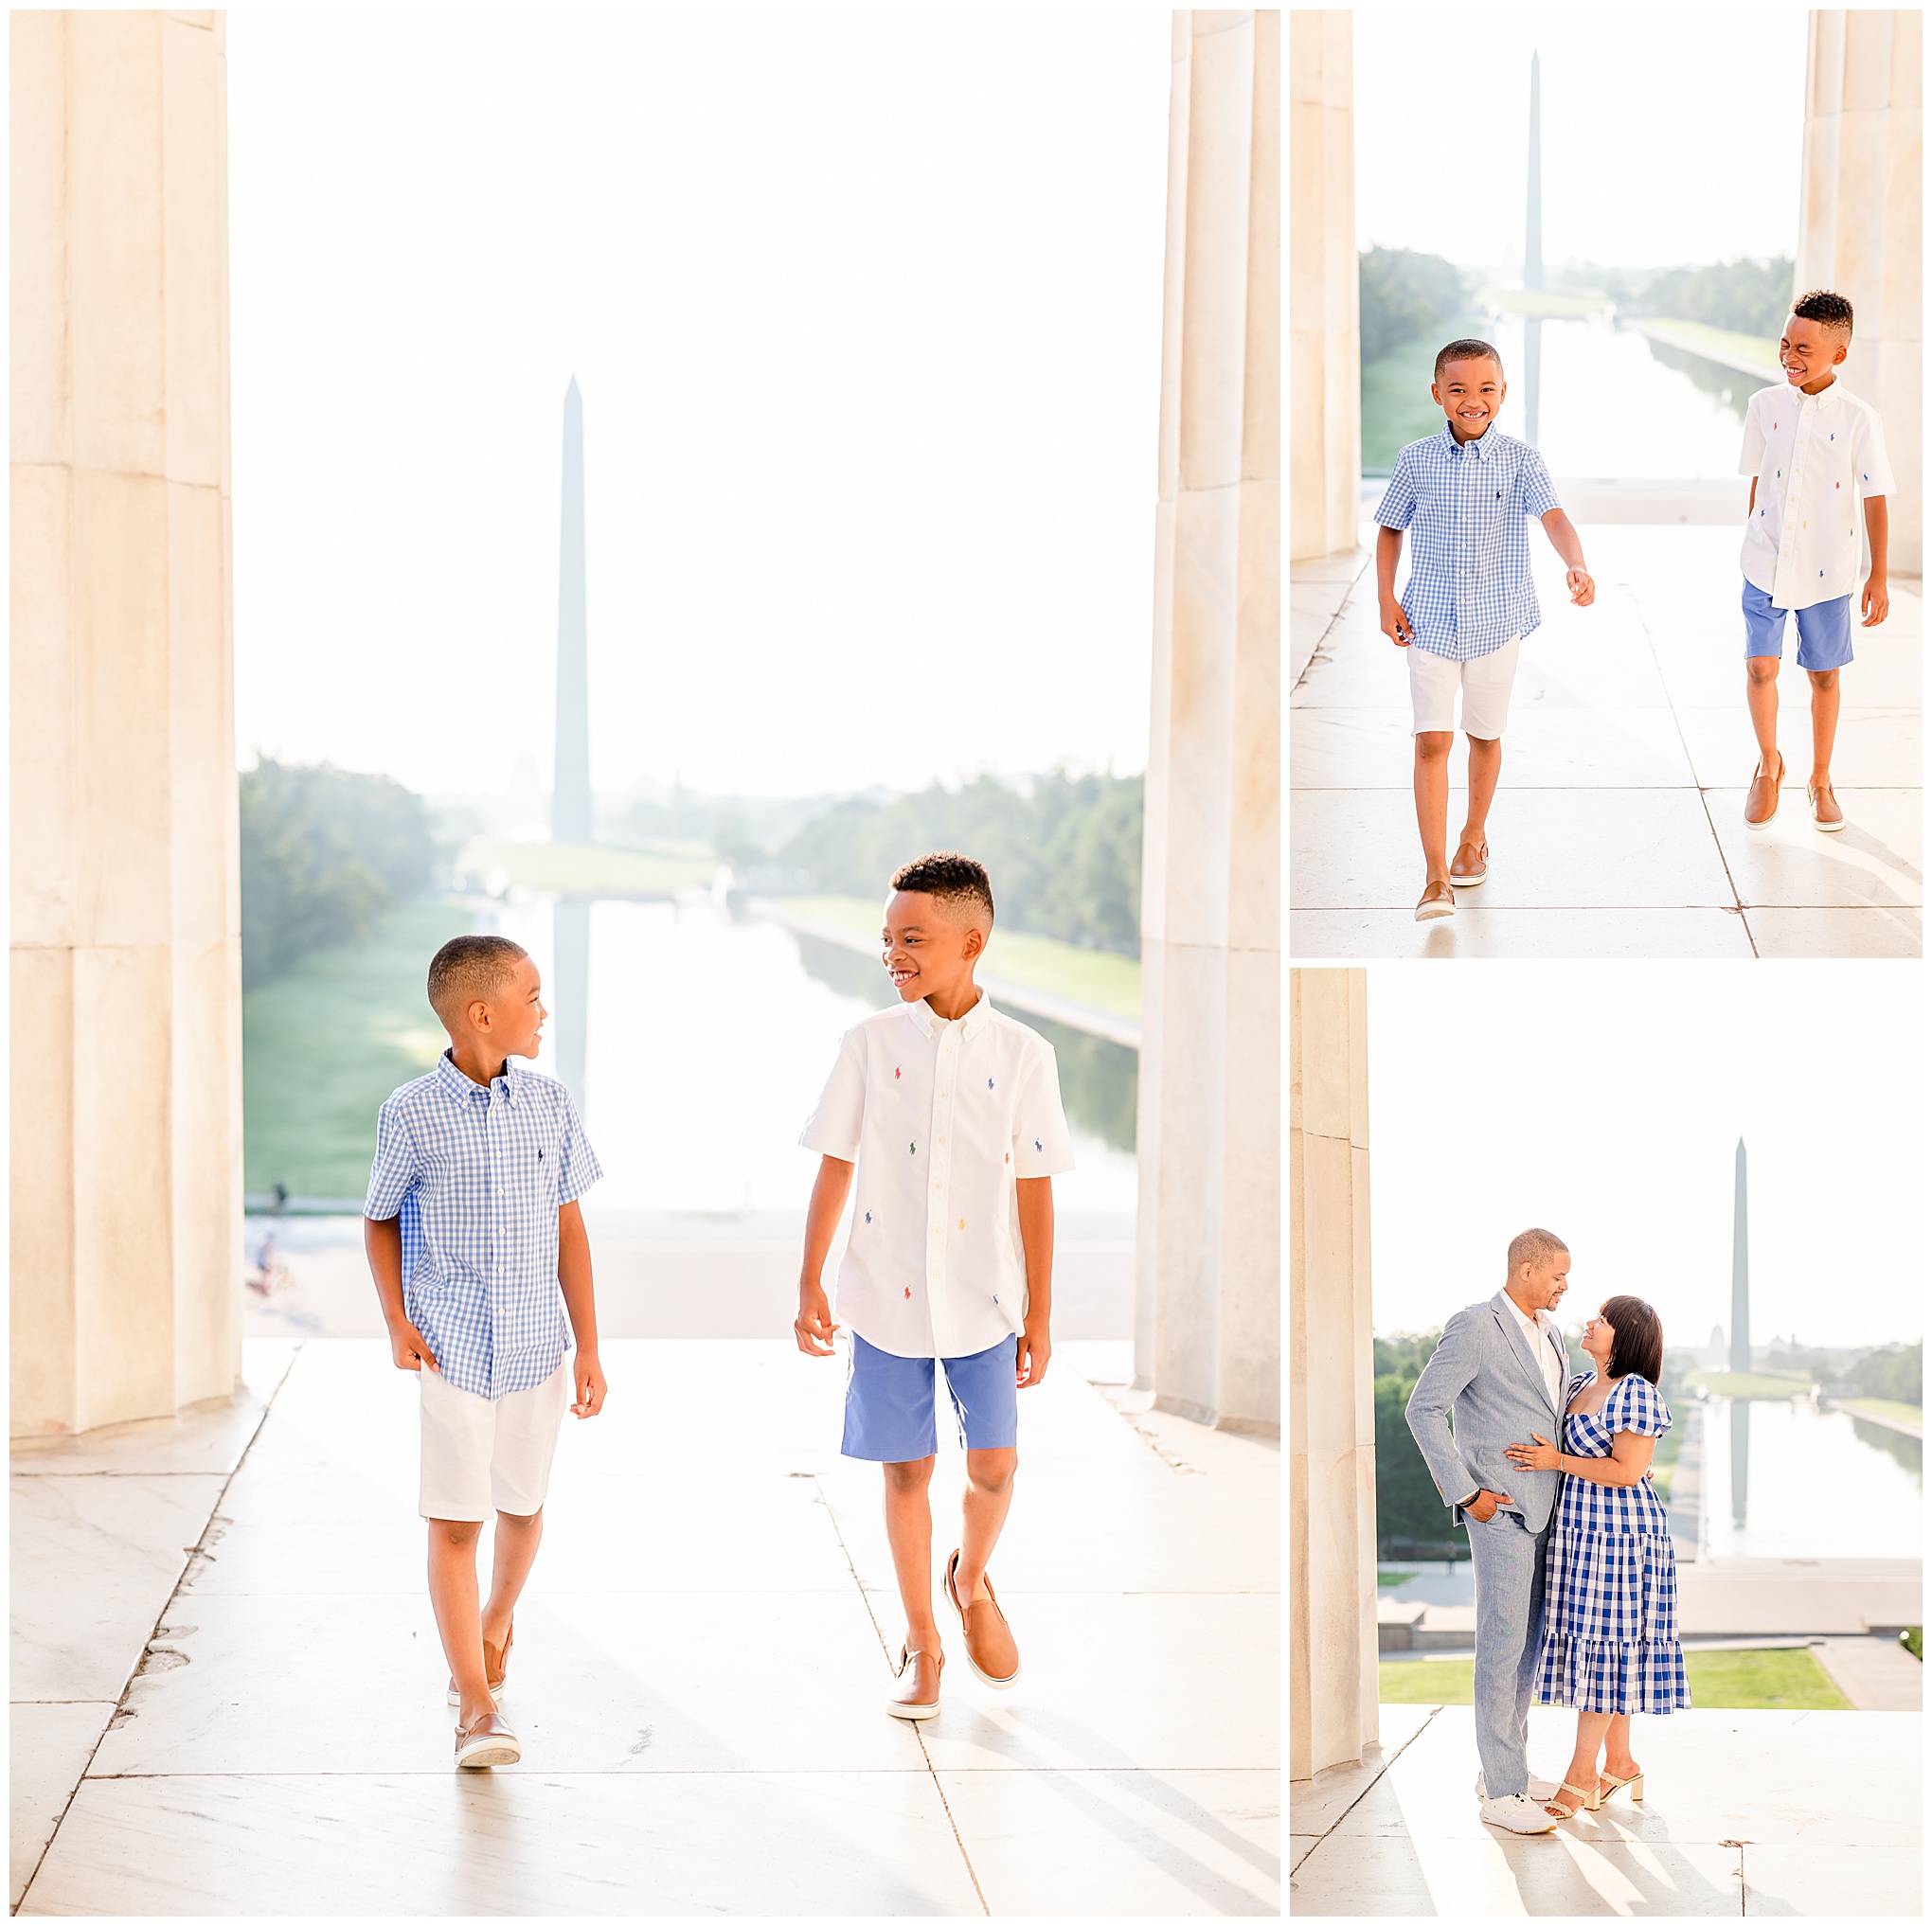 summer Lincoln Memorial family photos, Lincoln Memorial portraits, DC family photos, National Mall family photos, summer of four, family portrait poses, Lincoln Memorial portraits, DC family photographer, Rachel E.H. Photography, brothers walking with each other, parents hugging